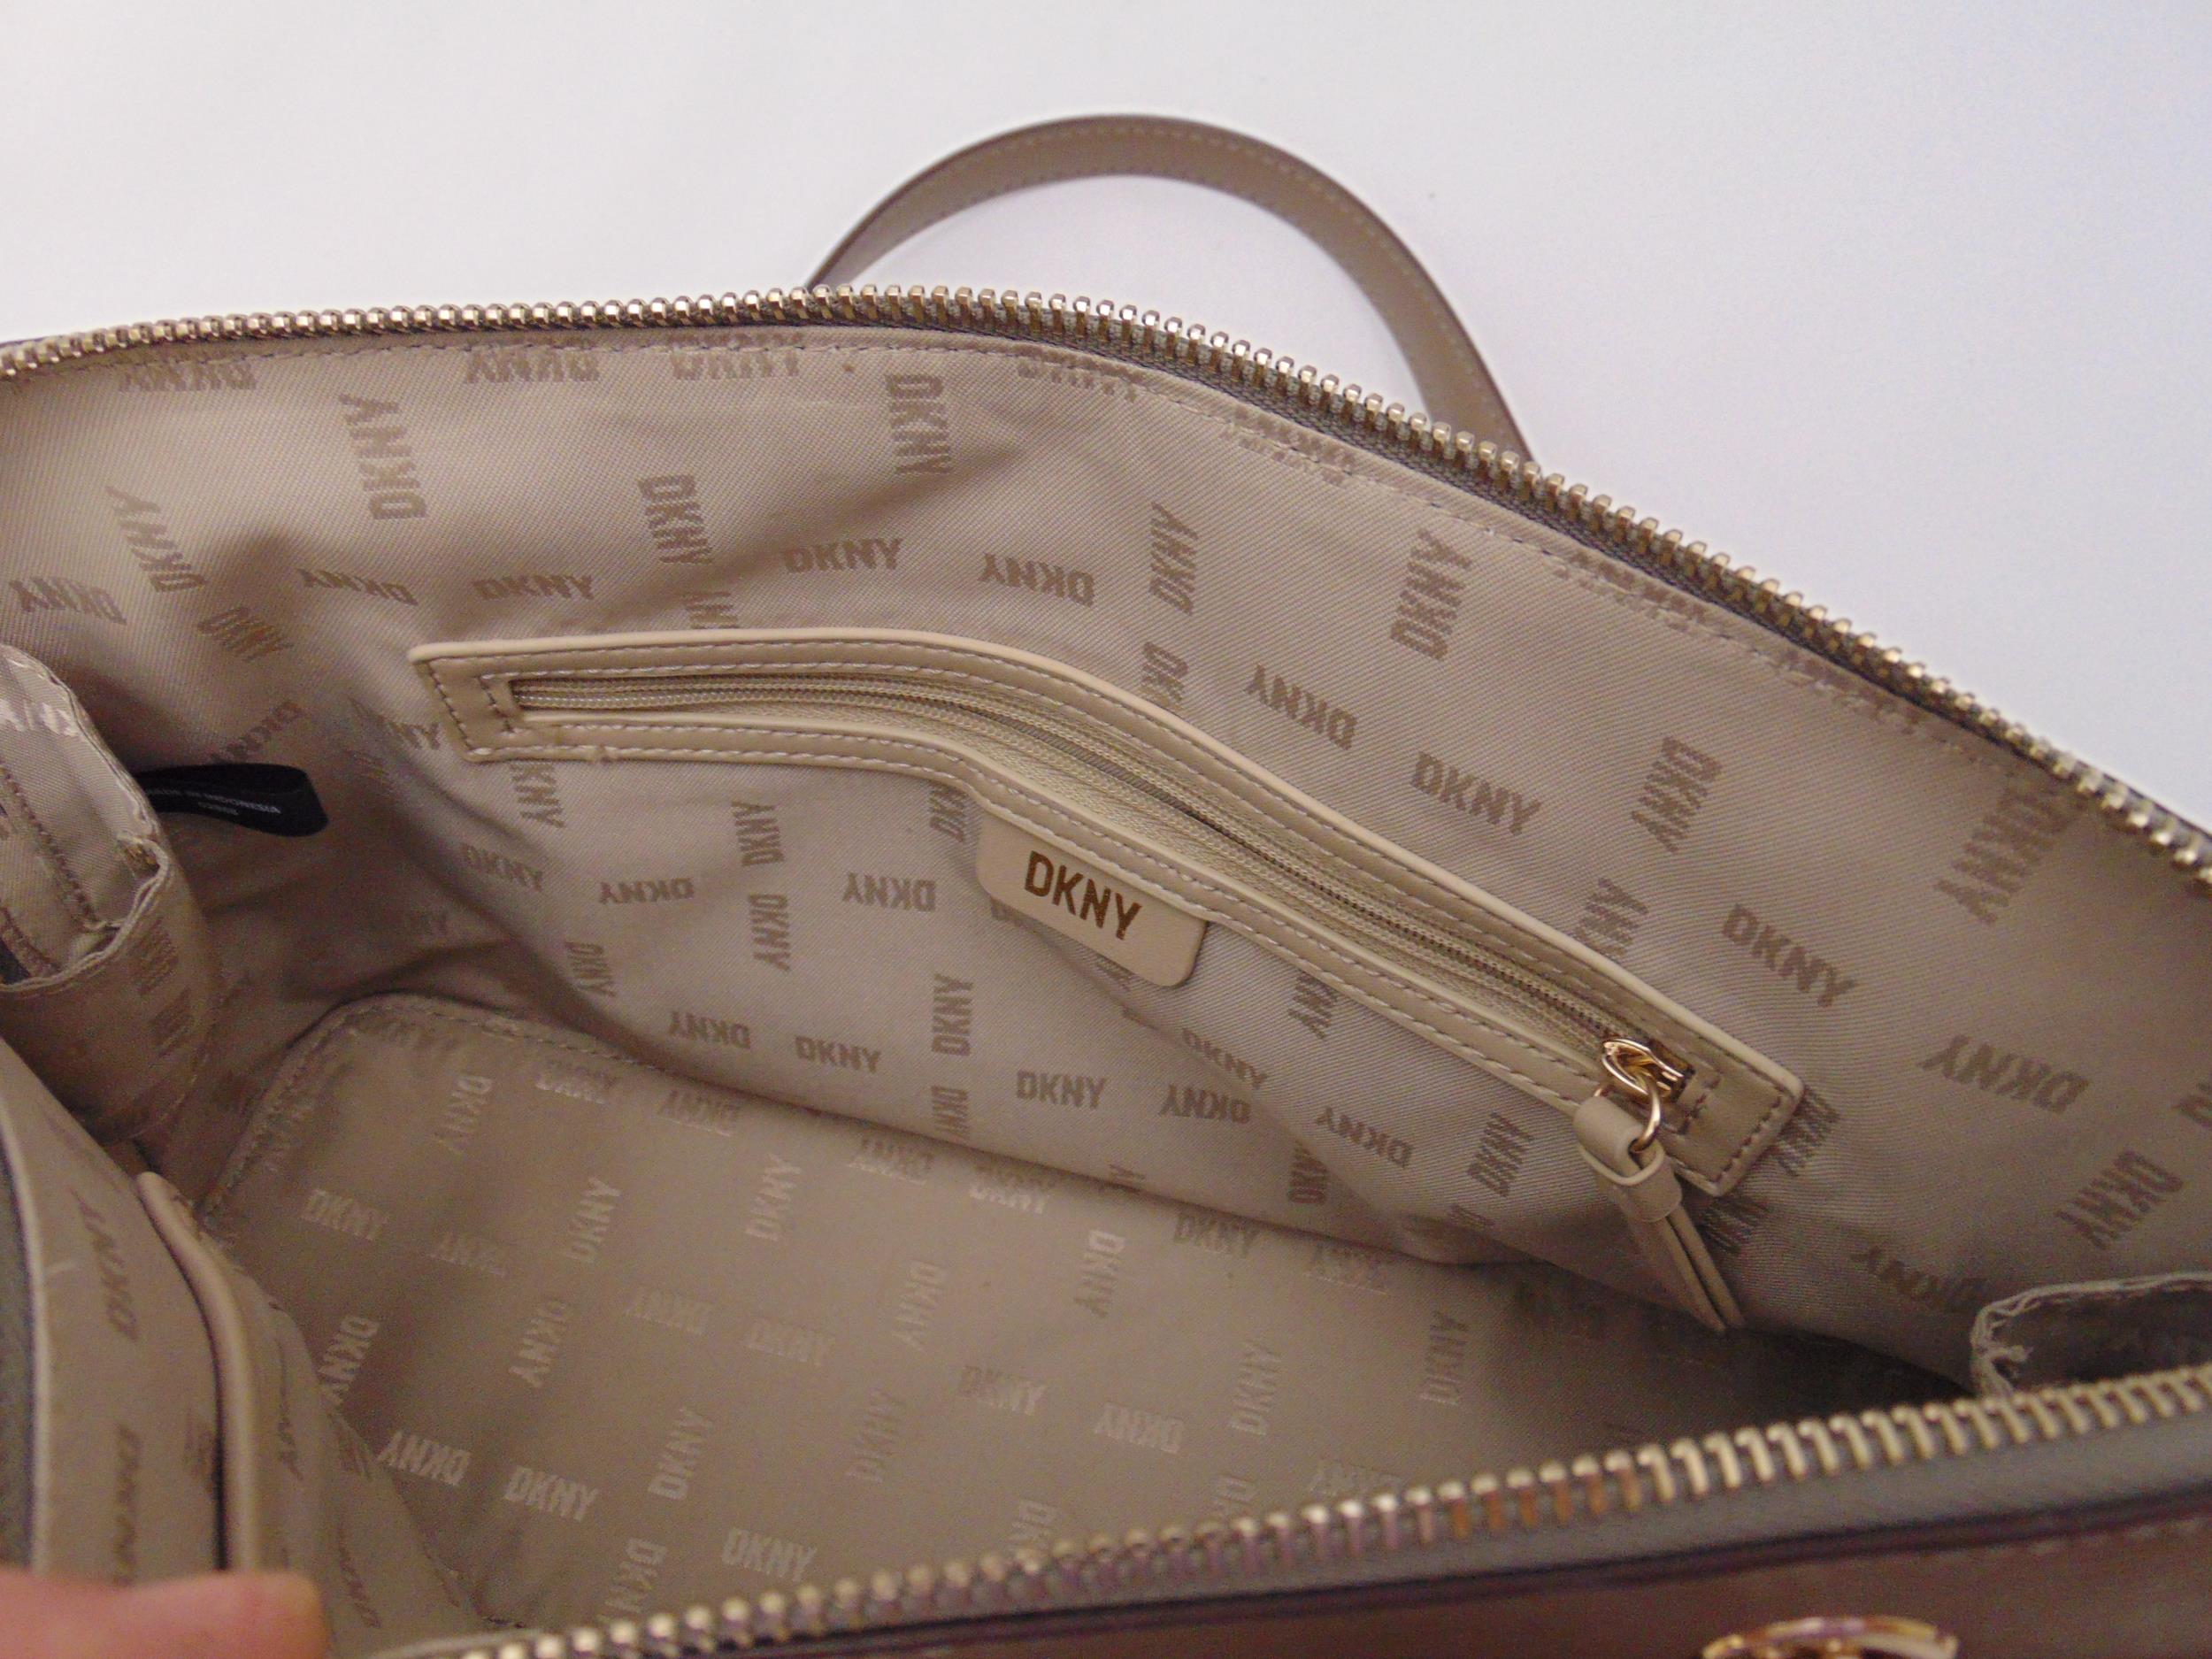 DKNY ladies taupe leather handbag with strap handle - Image 4 of 4